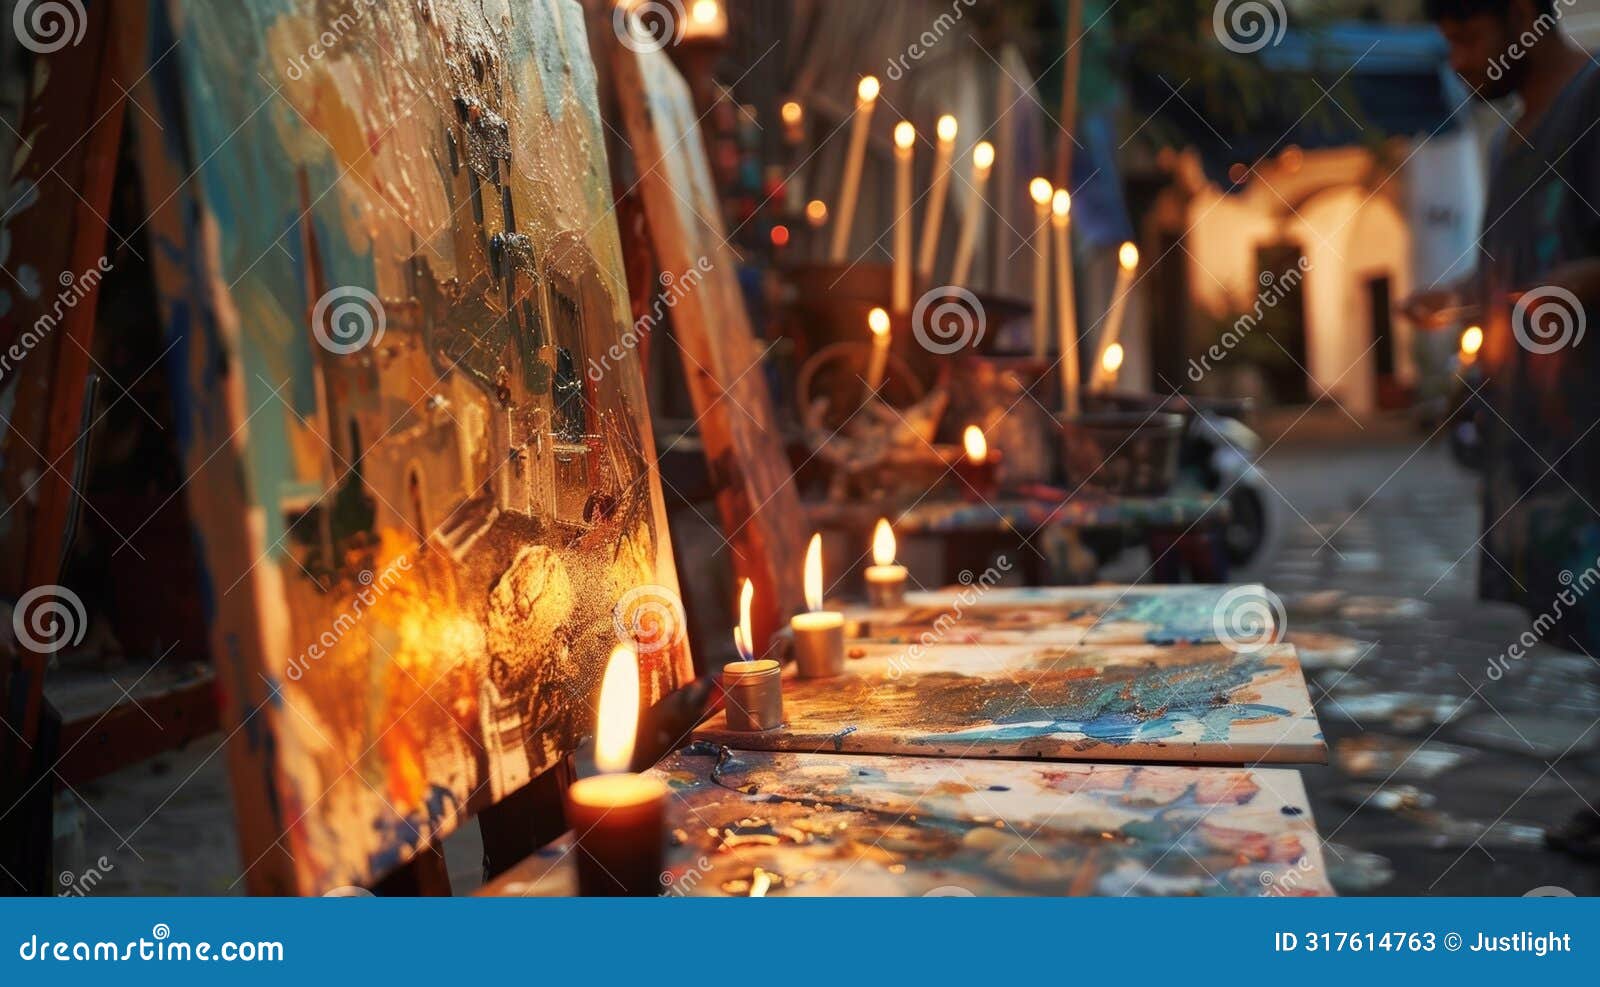 the candles seemed to bring life to the paintings as the artists worked diligently in the courtyard. 2d flat cartoon